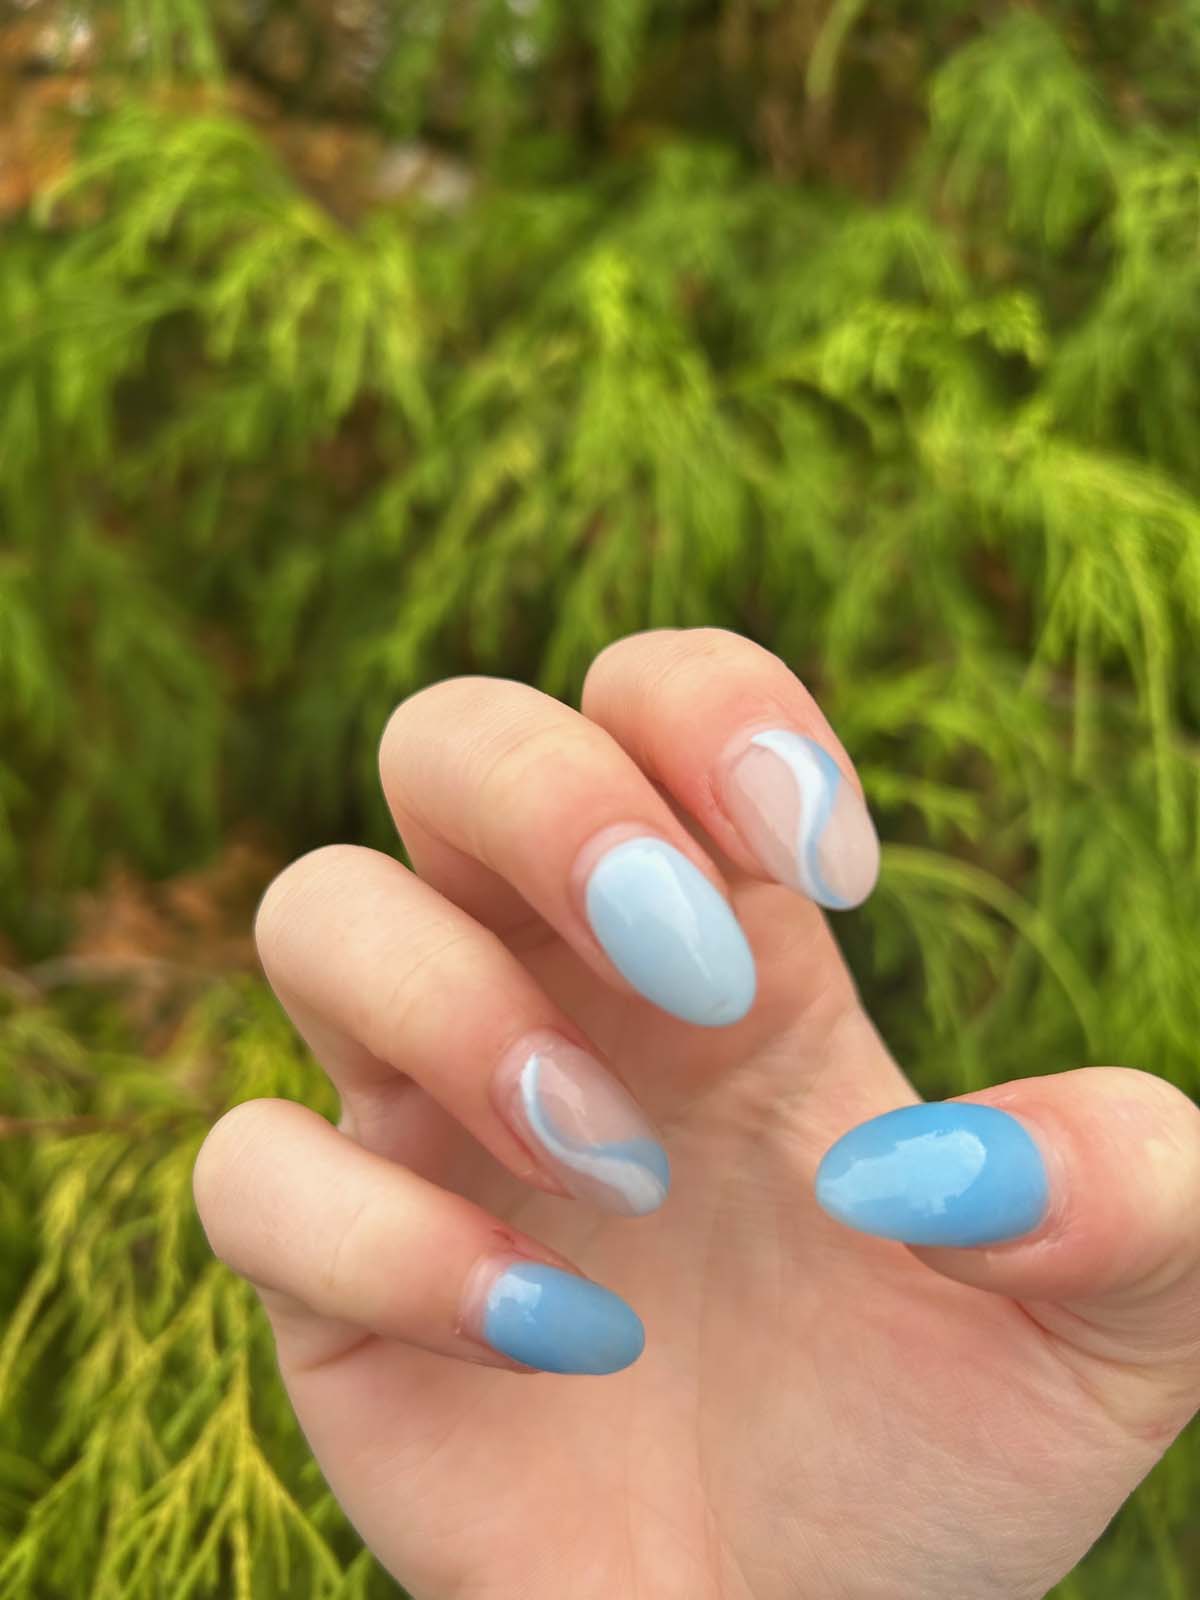 Different Shades Of Blue With Swirls Accent Nails Design DIY Manicure